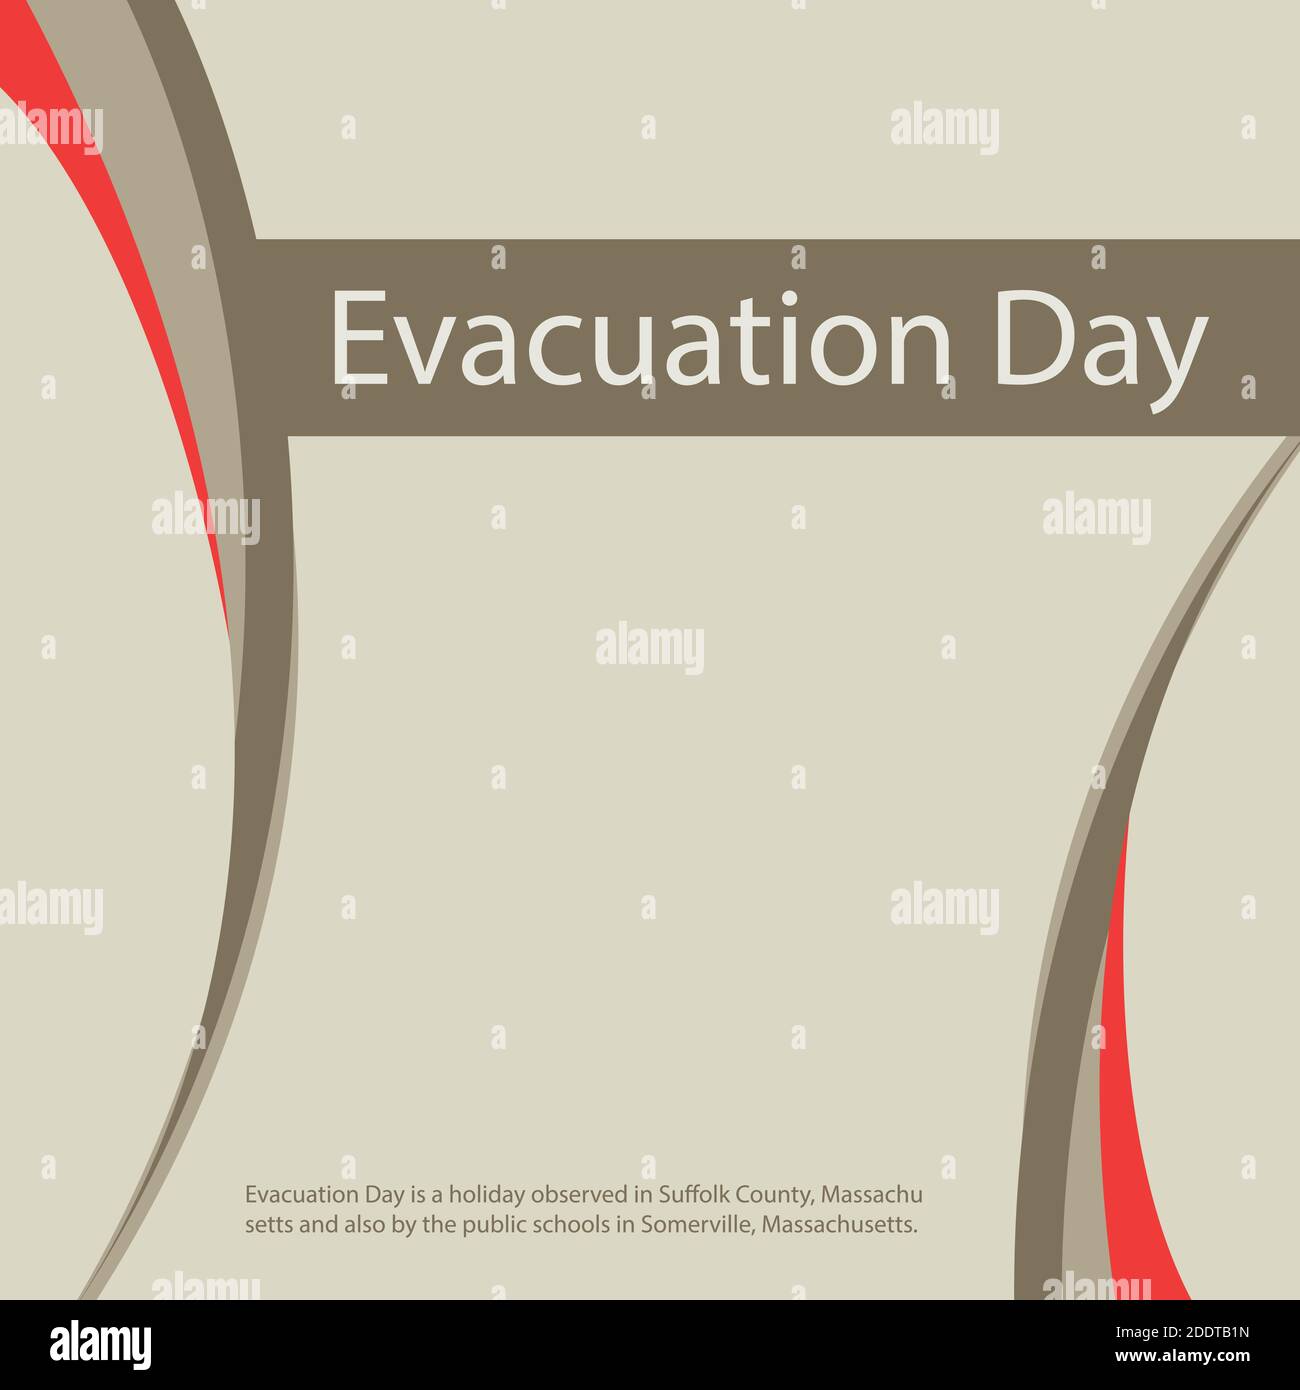 Evacuation Day is a holiday observed in Suffolk County, Massachusetts and also by the public schools in Somerville, Massachusetts. Stock Vector